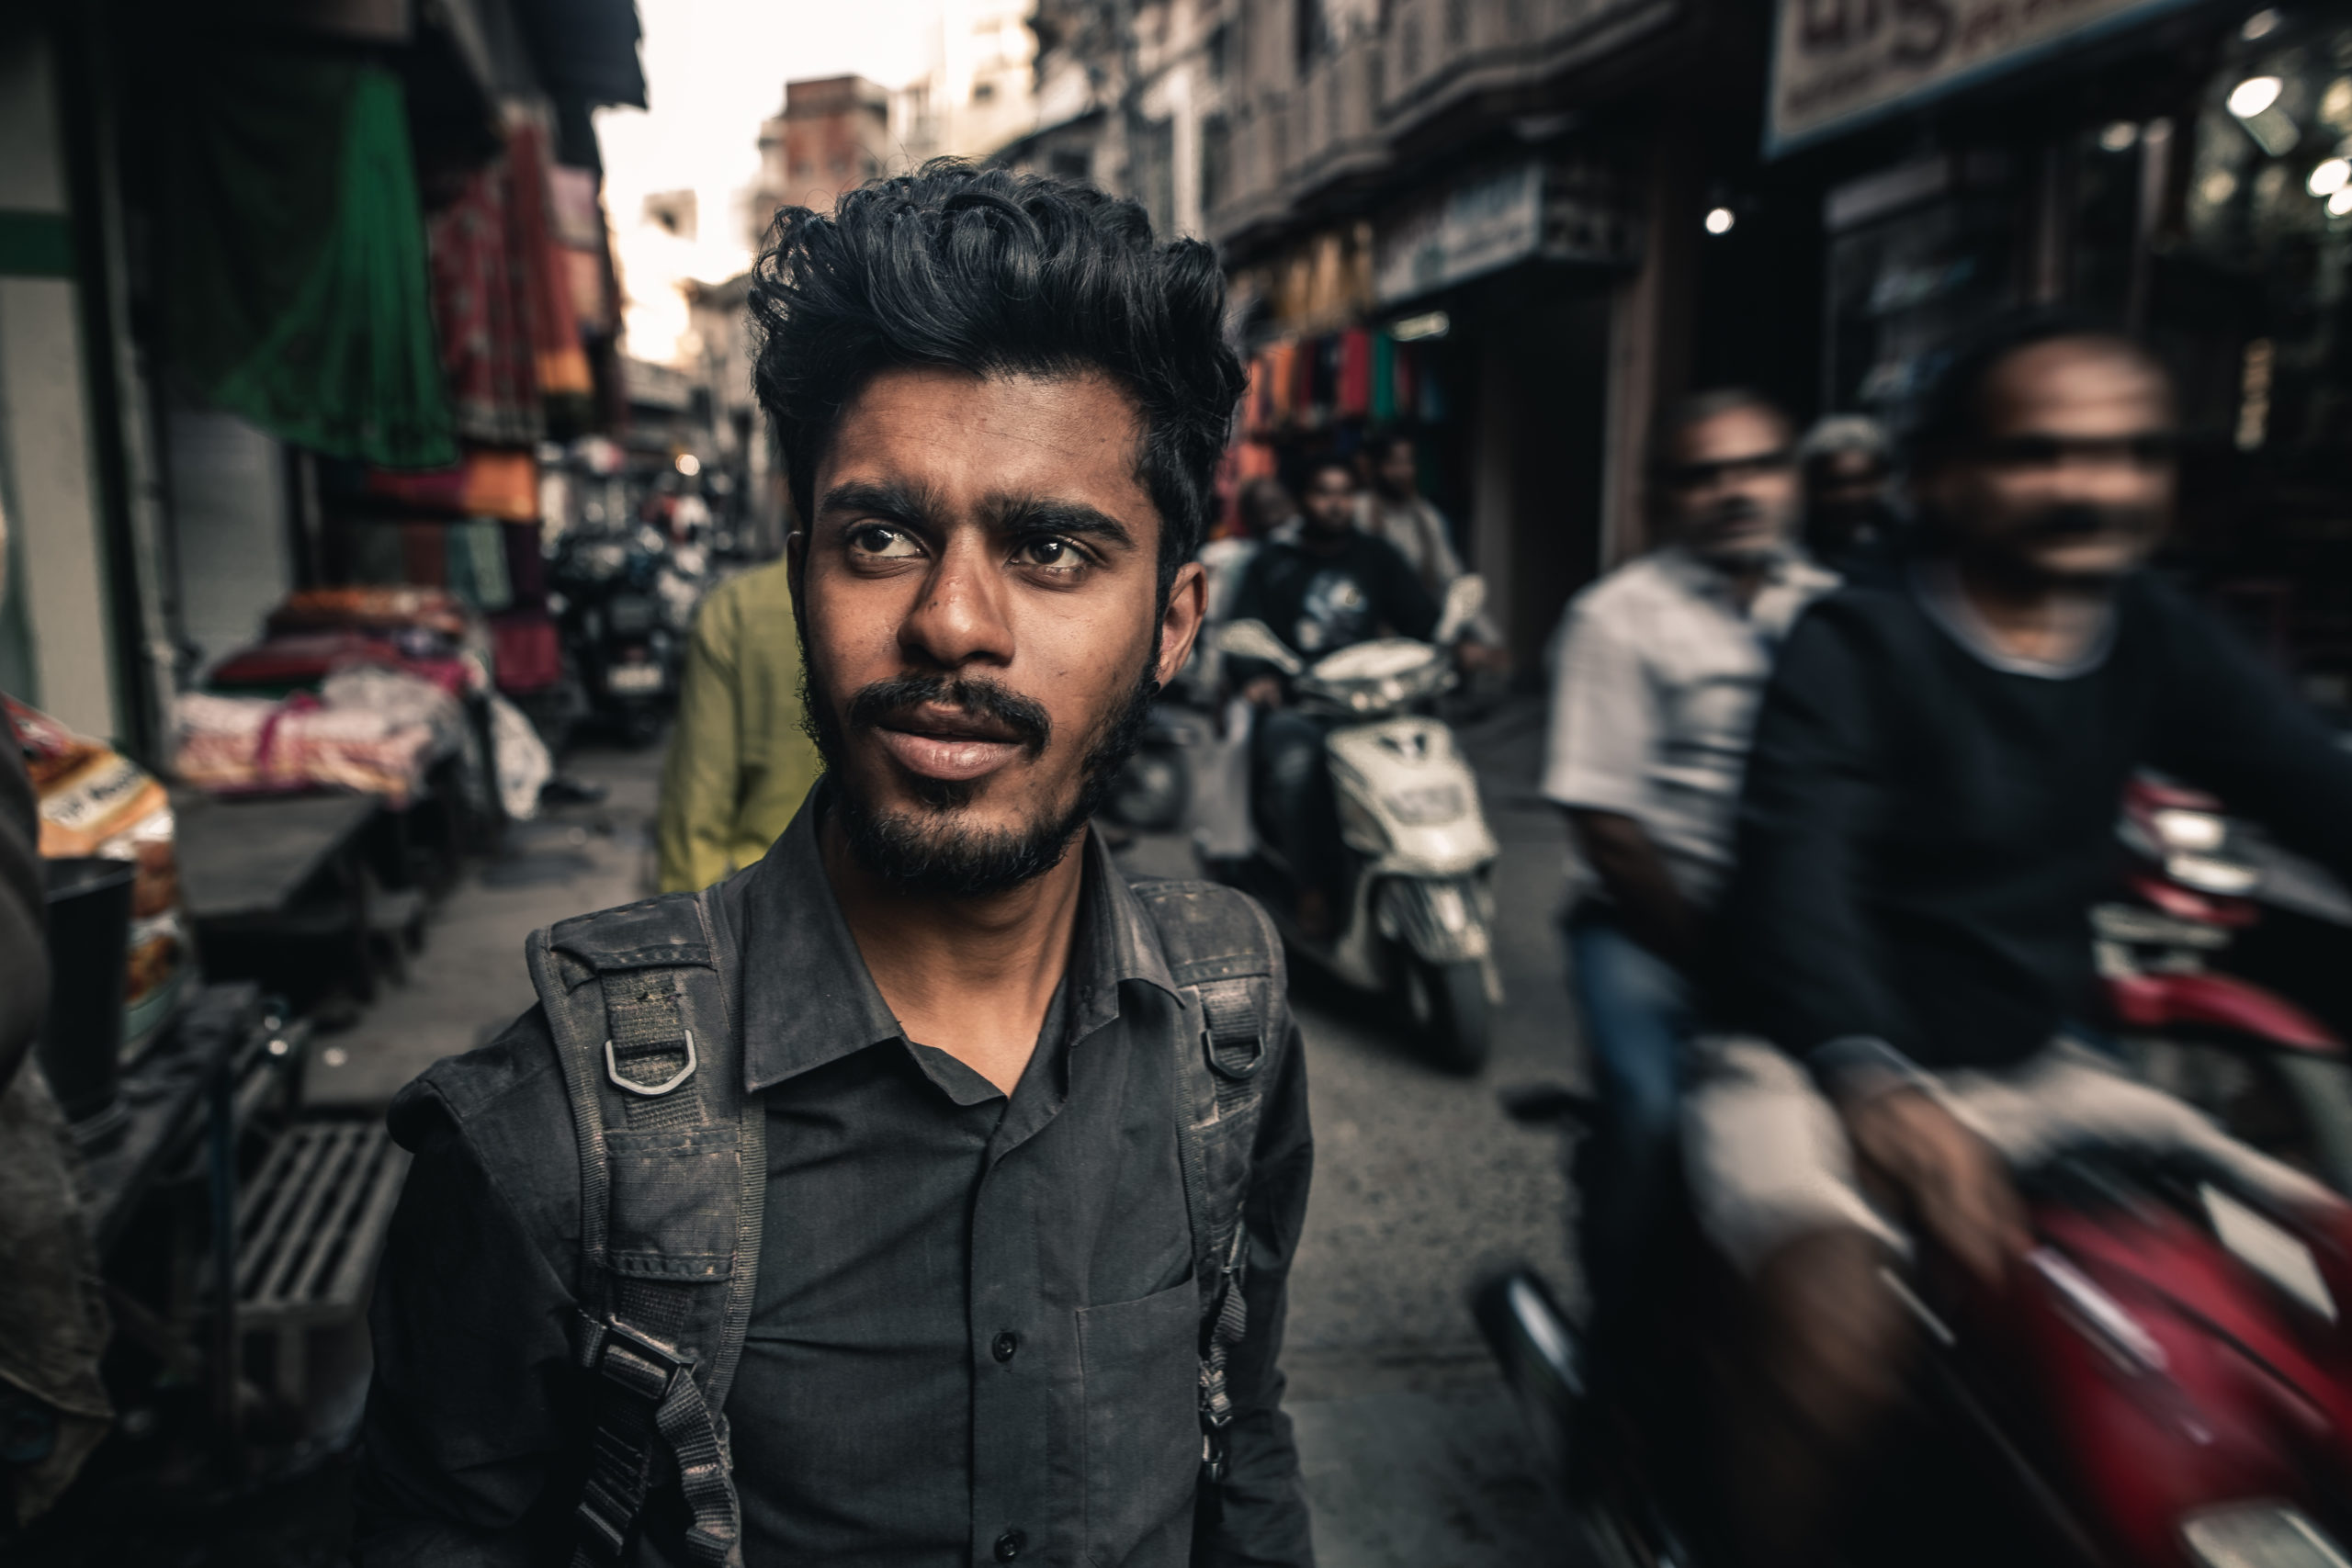 Portrait photography of an man on the streets of Mathura, India